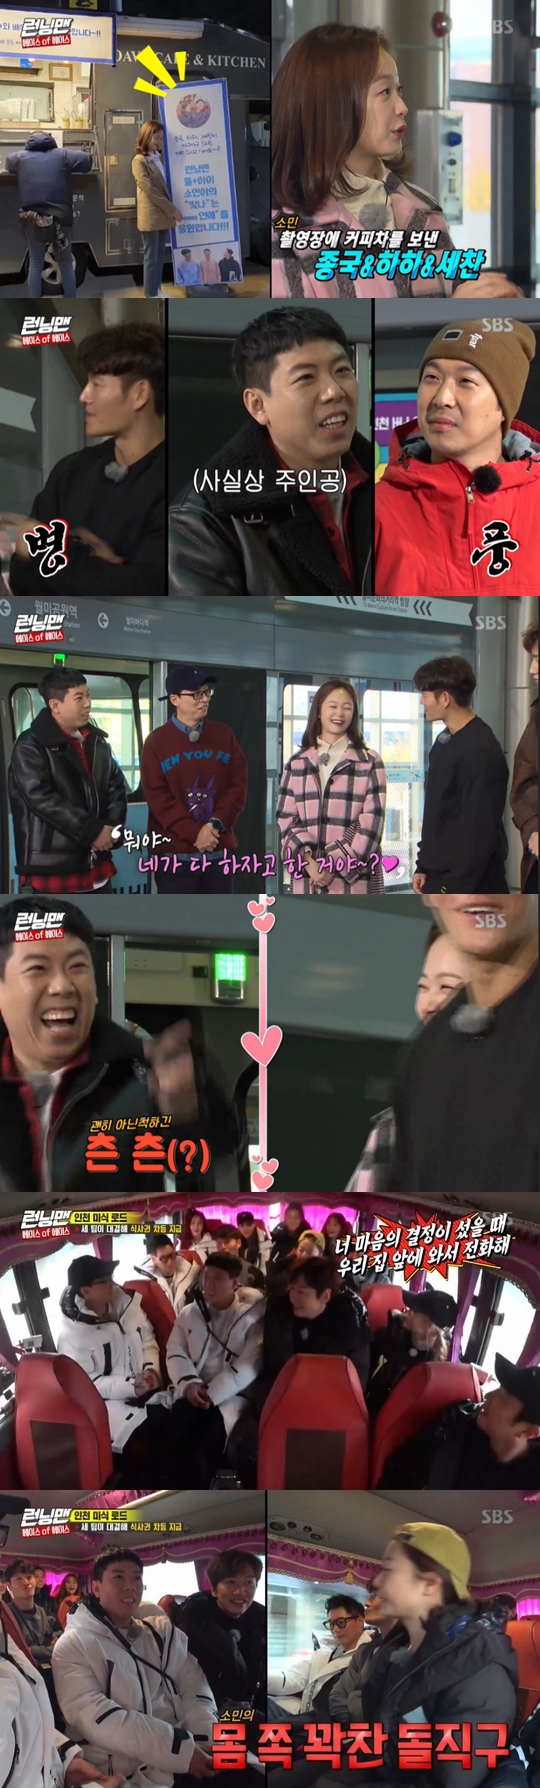 Viewers are thrilled, too: Actor Jeon So-min and comedian Yang Se-chan are attracting attention as they show off their entertainment stuff.On December 15, SBS Running Man followed by Jeon So-min and Yang Se-chan.Jeon So-min expressed his favor toward Yang Se-chan, and Yang Se-chan was ashamed and drawn a line.The two have recently been loved by viewers as the official Running Man couple.Running Man members talked about each others recent situation at the opening of the broadcast.MC Yoo Jae-Suk said, Somin sent Coffee or Tea to play a single-act play.Earlier, Jeon So-min posted a picture on the SNS on November 22 with the phrase I will do well.The photo shows Jeon So-min smiling in front of Coffee or Tea sent by Kim Jong-kook, Haha and Yang Se-chan.The three people cheered on Jeon So-min by sending Coffee or Tea with the phrase Big Data Love and actor Jeon So-min.I was really surprised - I didnt know, but I was here, said Jeon So-min.Yoo Jae-Suk asked, Is not it Kim Jong-kook, Haha, because I would like to see if Sechan sends Coffee or Tea alone? Jeon So-min said, I do not have Yang Se-chan pictures on top.I asked (Yang Se-chan) and I said that my brothers did it because they only put a spoon on it. I had no idea, I took a picture ... Kim Jong-kook said, No, Sechan said I should do it, Yang Se-chan said.Haha teased Derre: Yoo Jae-Suk, who was standing between the two, joked, I wasnt too aware when I was there, and laughed.The theme of the broadcast was the Incheon Gourmet Road; the cast was divided into three teams to stage a dinner showdown, and then moved to Incheon by bus.The two mens thumbs continued on the move.Kim Jong-kook, who was sitting next to Jeon So-min, told Yang Se-chan: Why did you give up to me when you could have sat here?Are you conscious of (Jeon So-min)? Song Ji-hyo asked, so Yoo Jae-Suk said, Lets keep a distance for a while.I called Sechan a few times last week, but he was trying to hang up so fast, said Jeon So-min.It can be confusing because its mentioned a few times on the air, laughed Yoo Jae-Suk.Group AOA member Hye-jung asked the members, Is it a love line (Yang Se-chan, Jeon So-min)?Yang Se-chan replied no but Yoo Jae-Suk left a lingering note with the answer not yet.Then Jeon So-min told Yang Se-chan: Hey, come call me in front of my house when you have a decision of mind.Whether or not, yelled Yang Se-chan, who made a laugh.hwang hye-jin